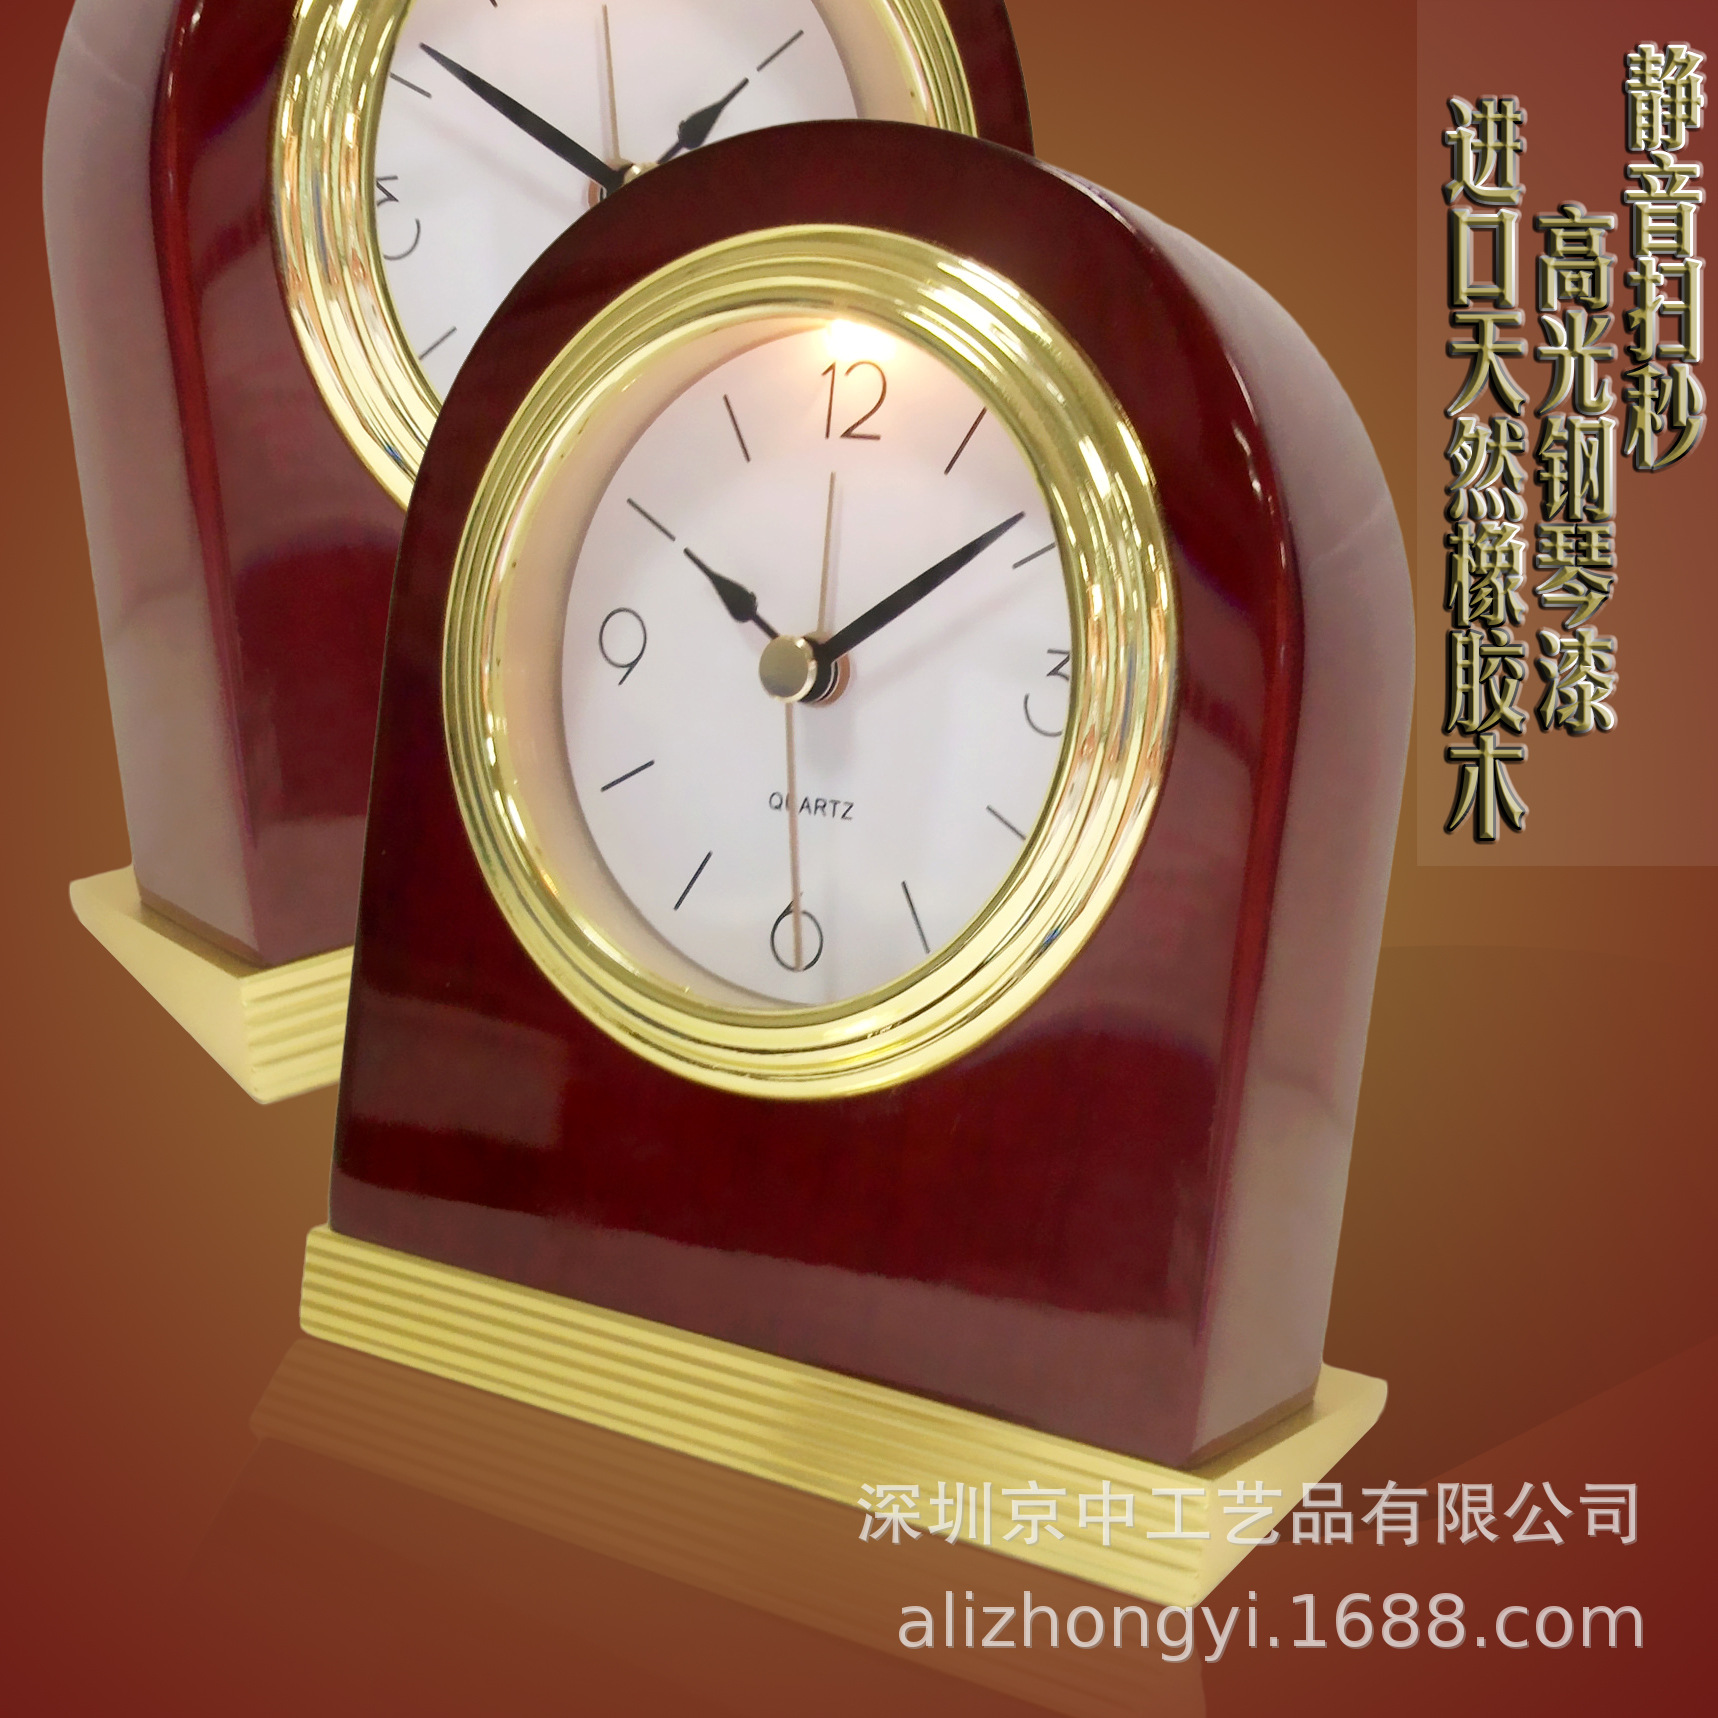 Pick up Mute Sweep hotel alarm clock hotel Guest room Supplies wholesale Highlight Piano Wood alarm clock